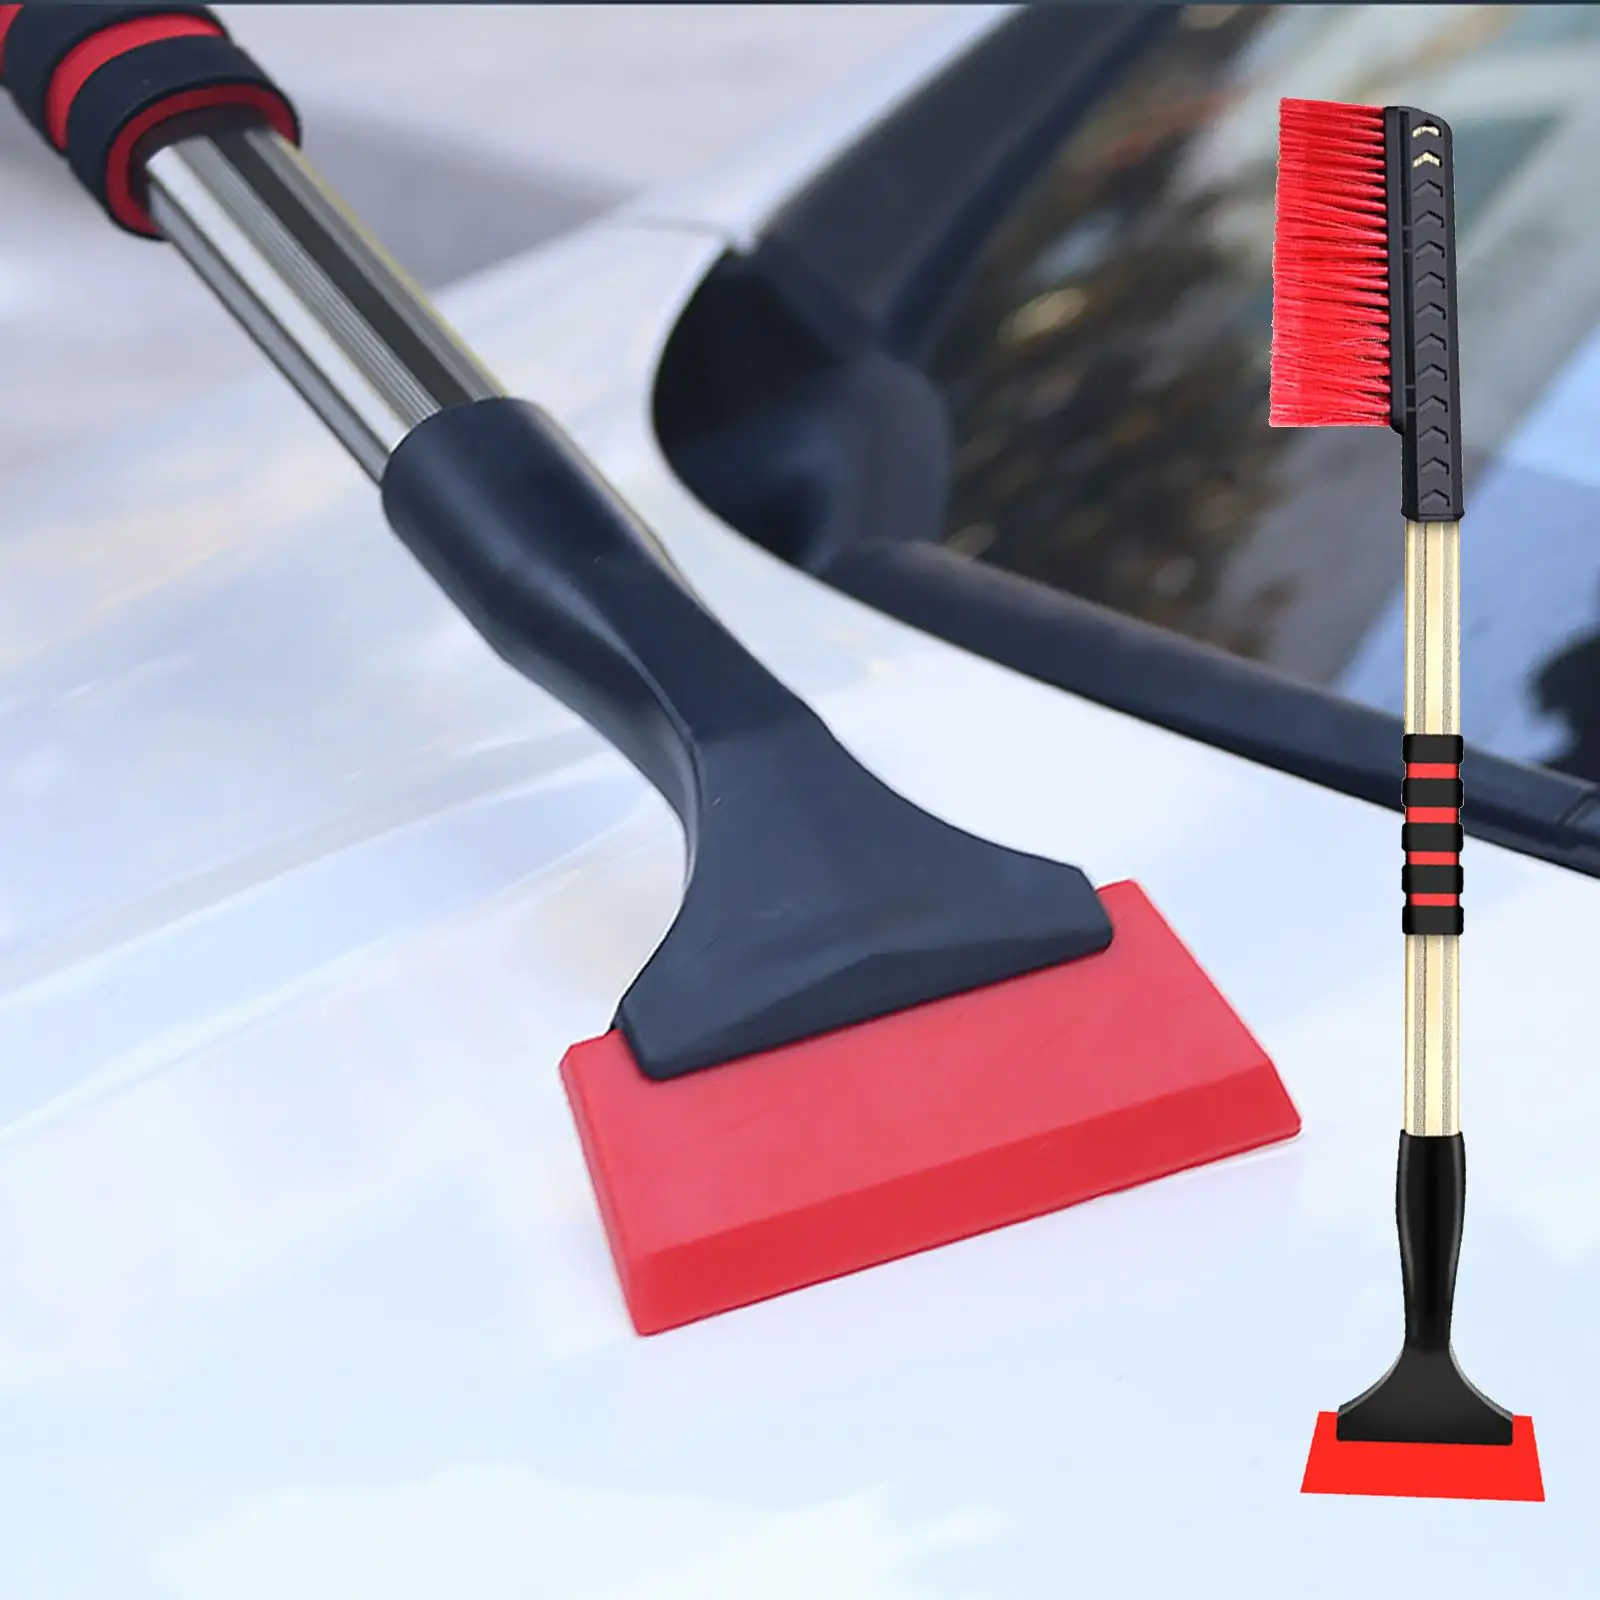 Professional Snow Removal Brush Tool Telescopic Handle Car Window Snow Cleaner Ice Snow Scraper for Truck SUV Vehicle Car